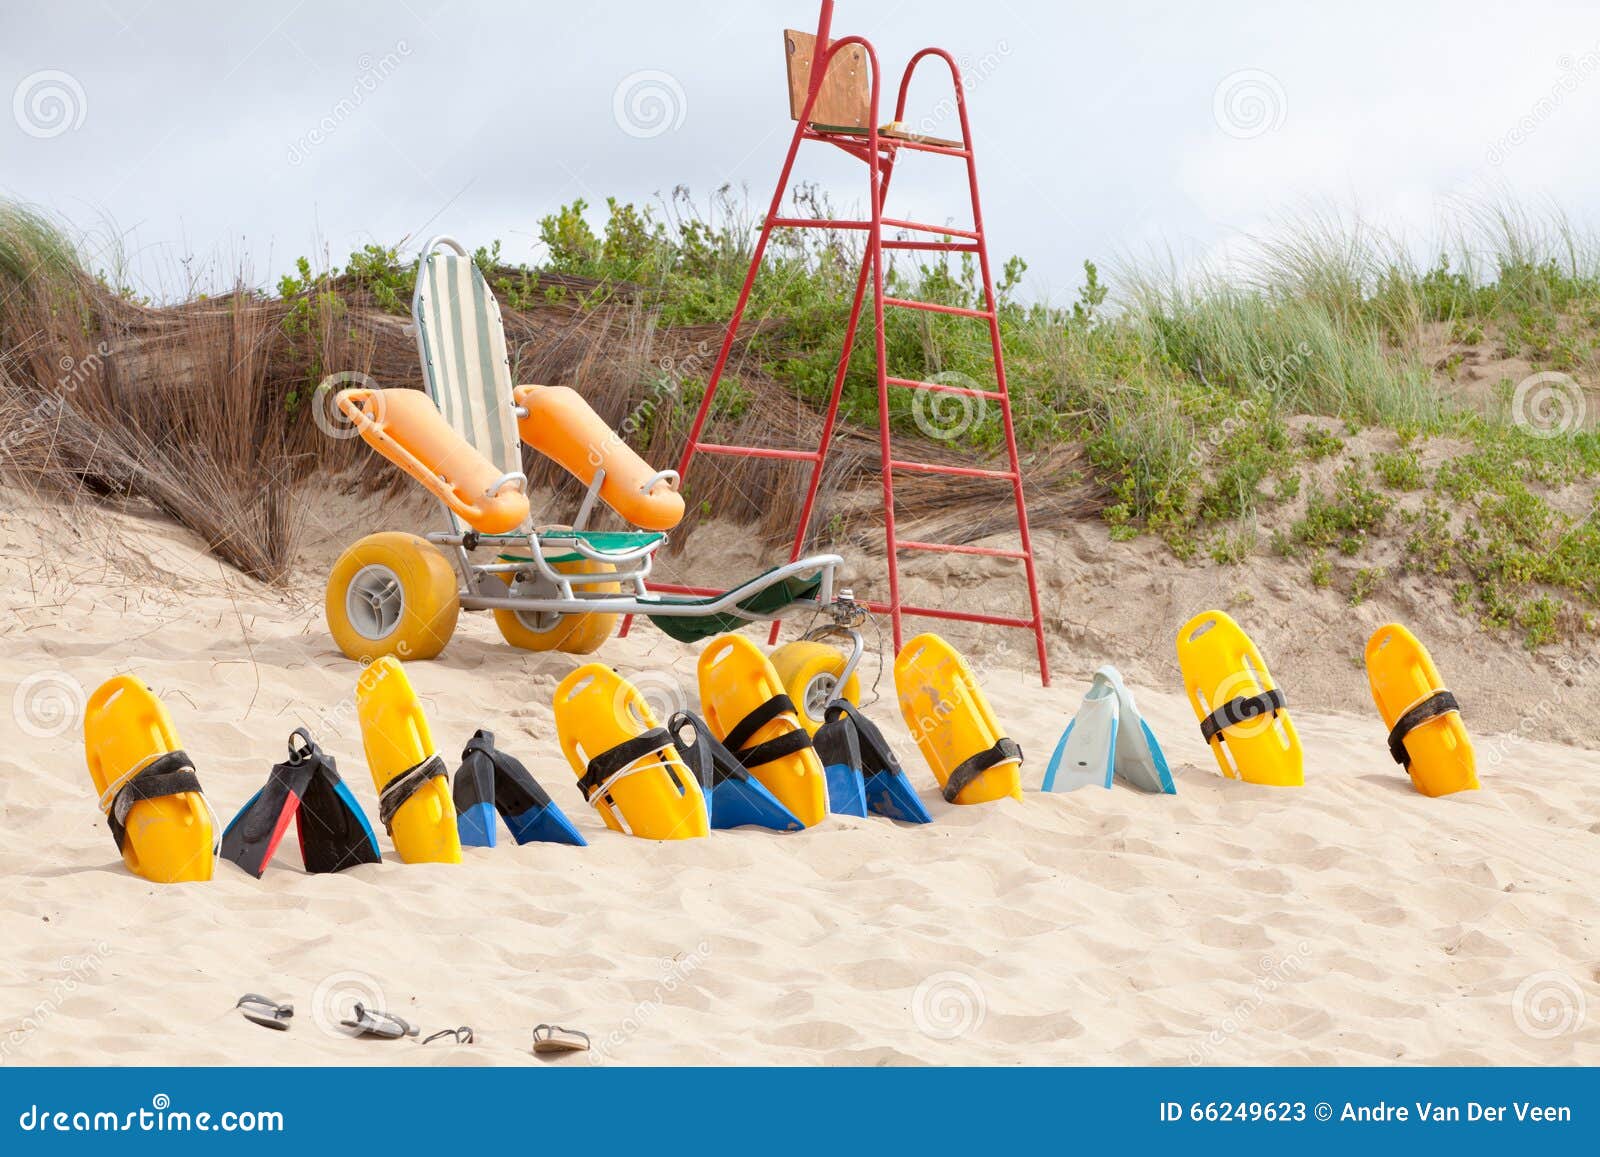 Lifesaver Chair and Equipment on the Beach Stock Image - Image of ...